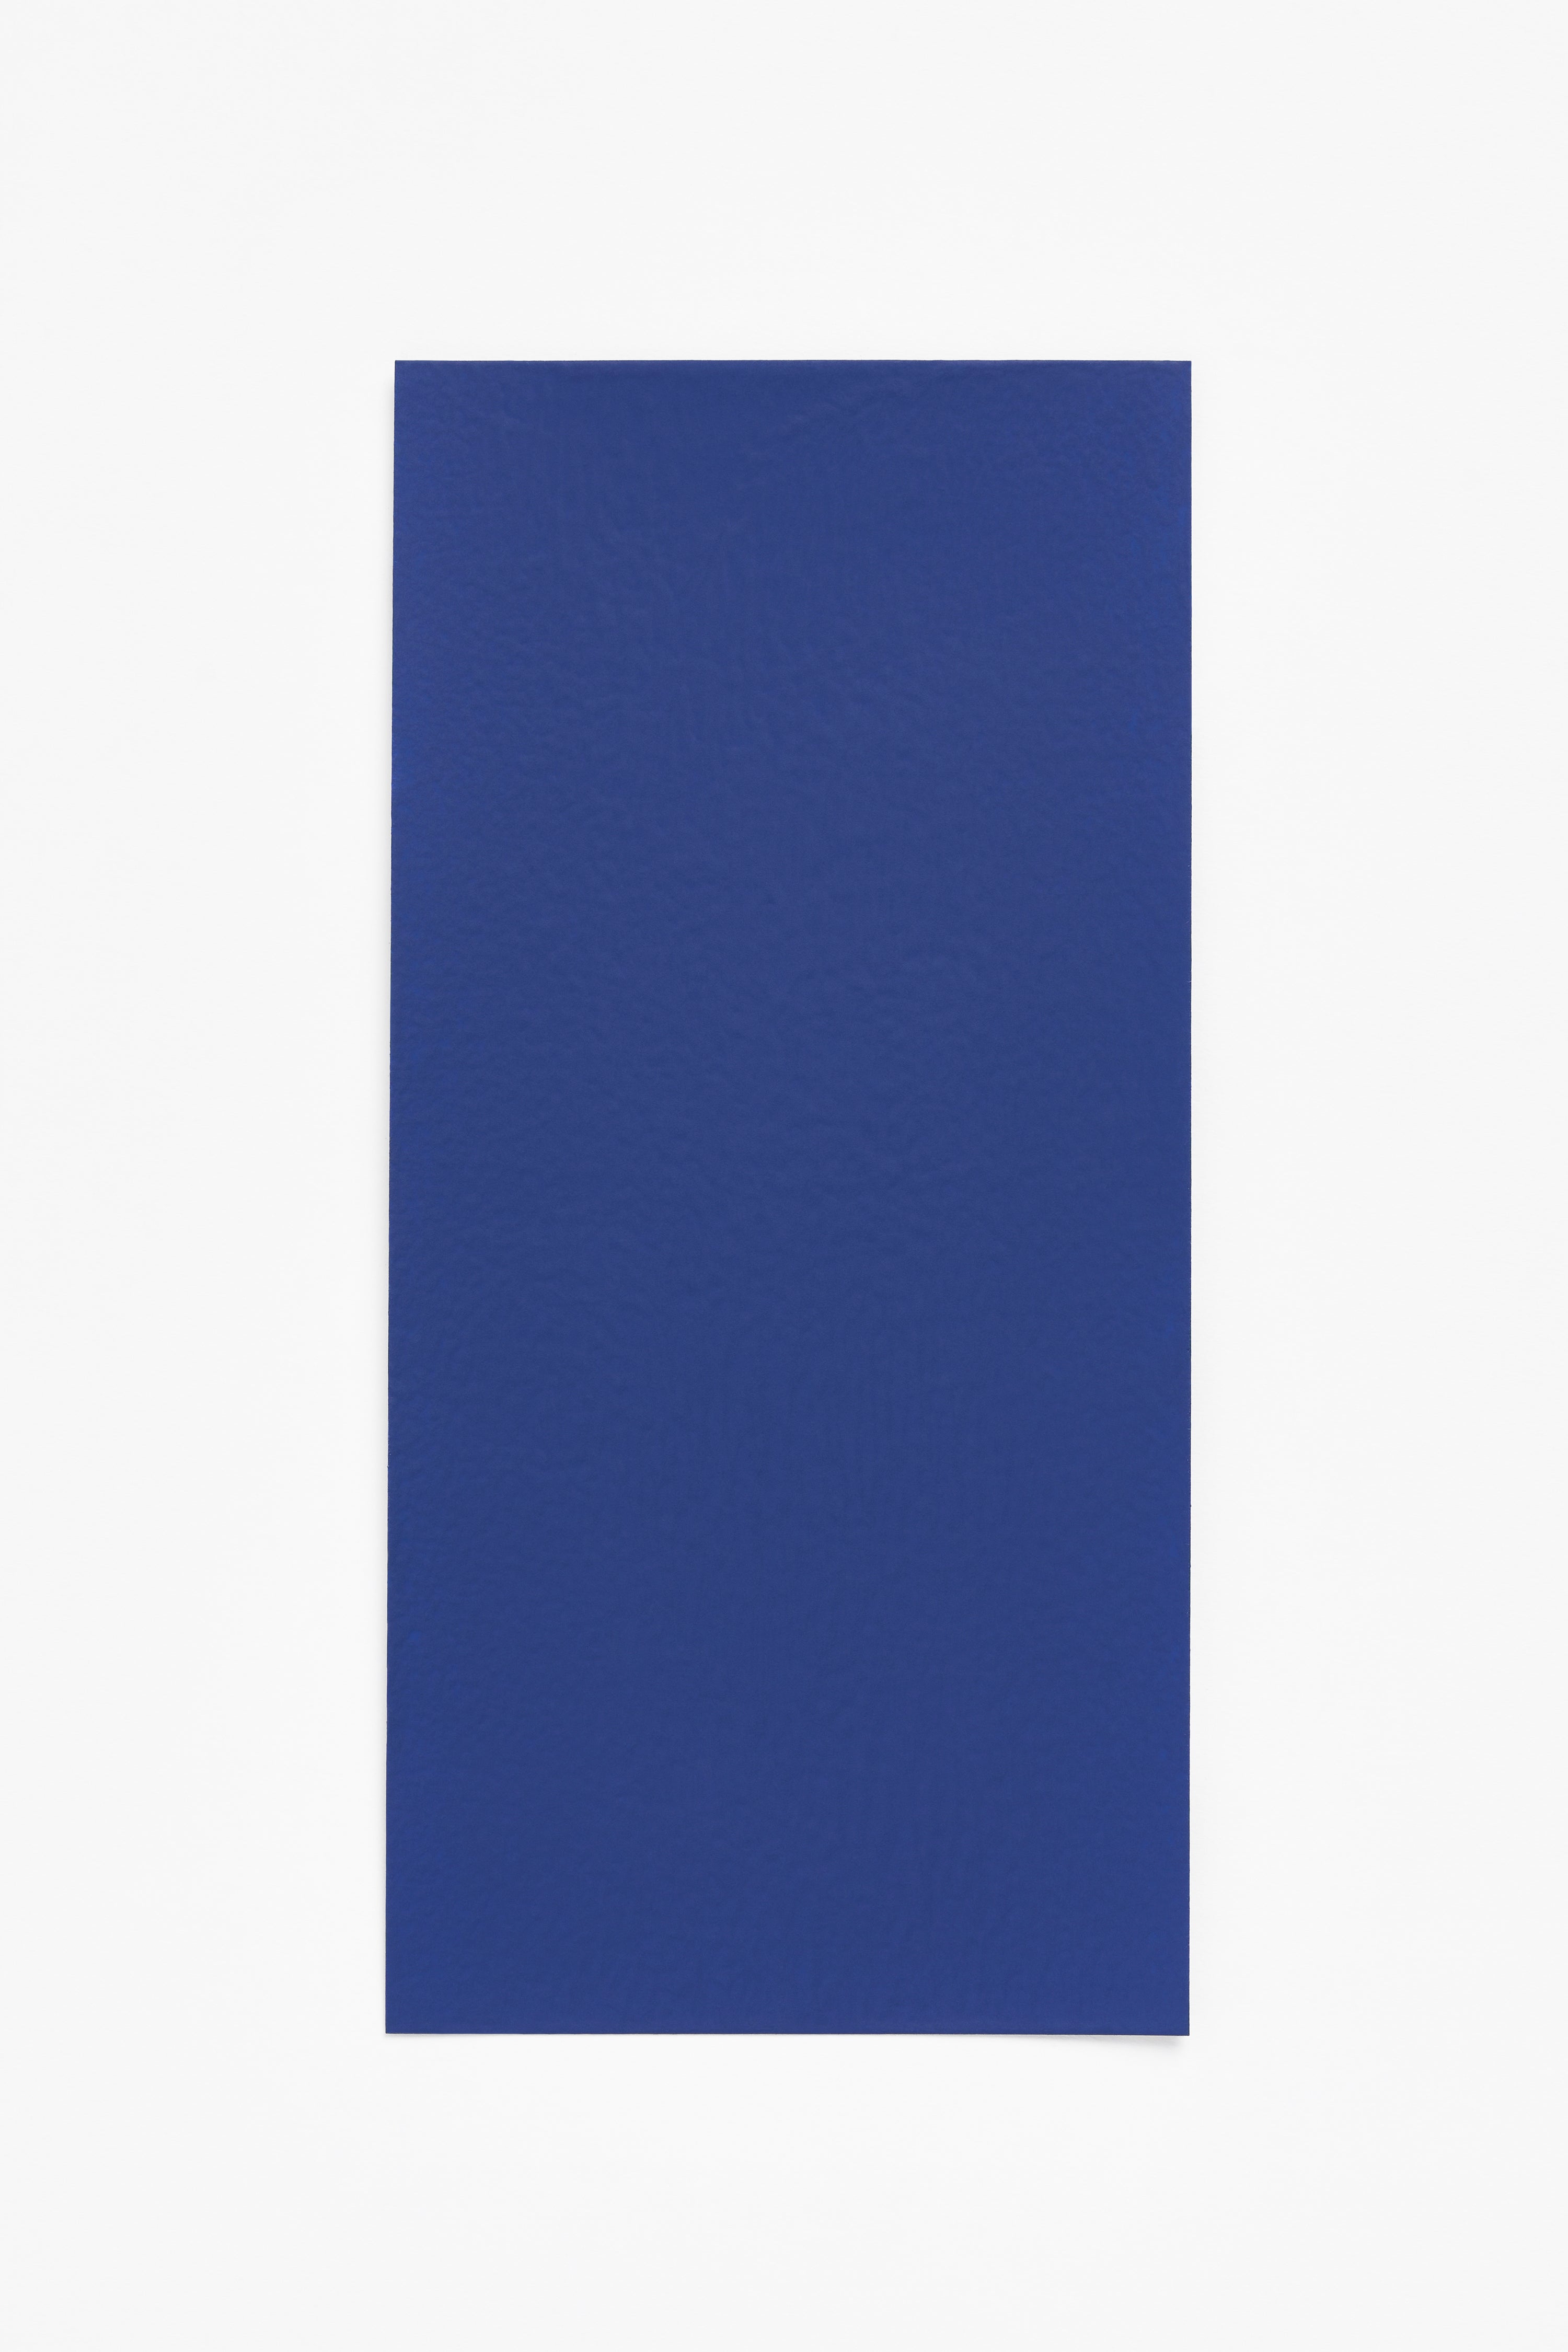 Raf — a paint colour developed by Halleroed for Blēo